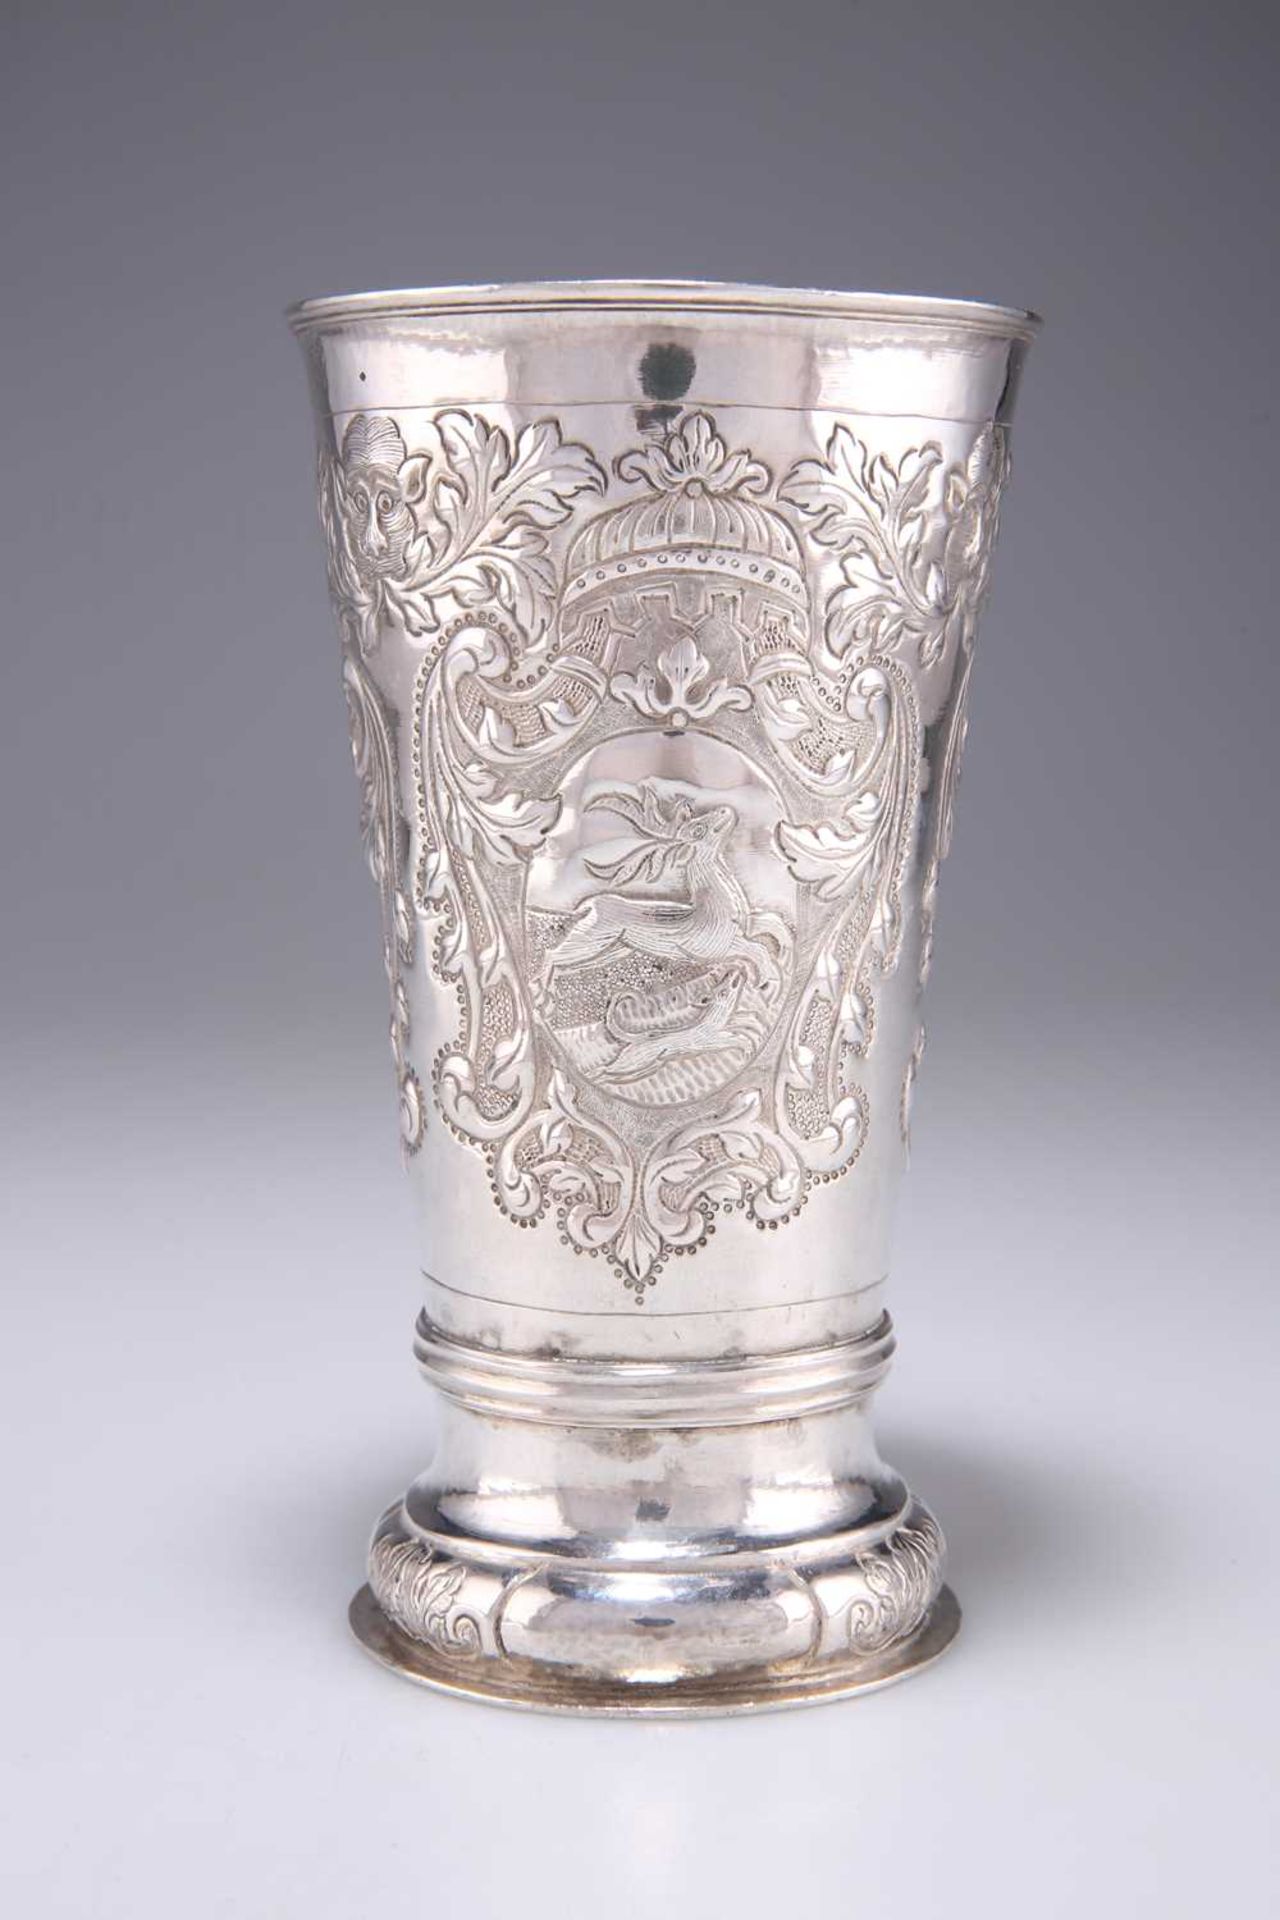 AN 18TH CENTURY RUSSIAN LARGE SILVER BEAKER - Image 2 of 3